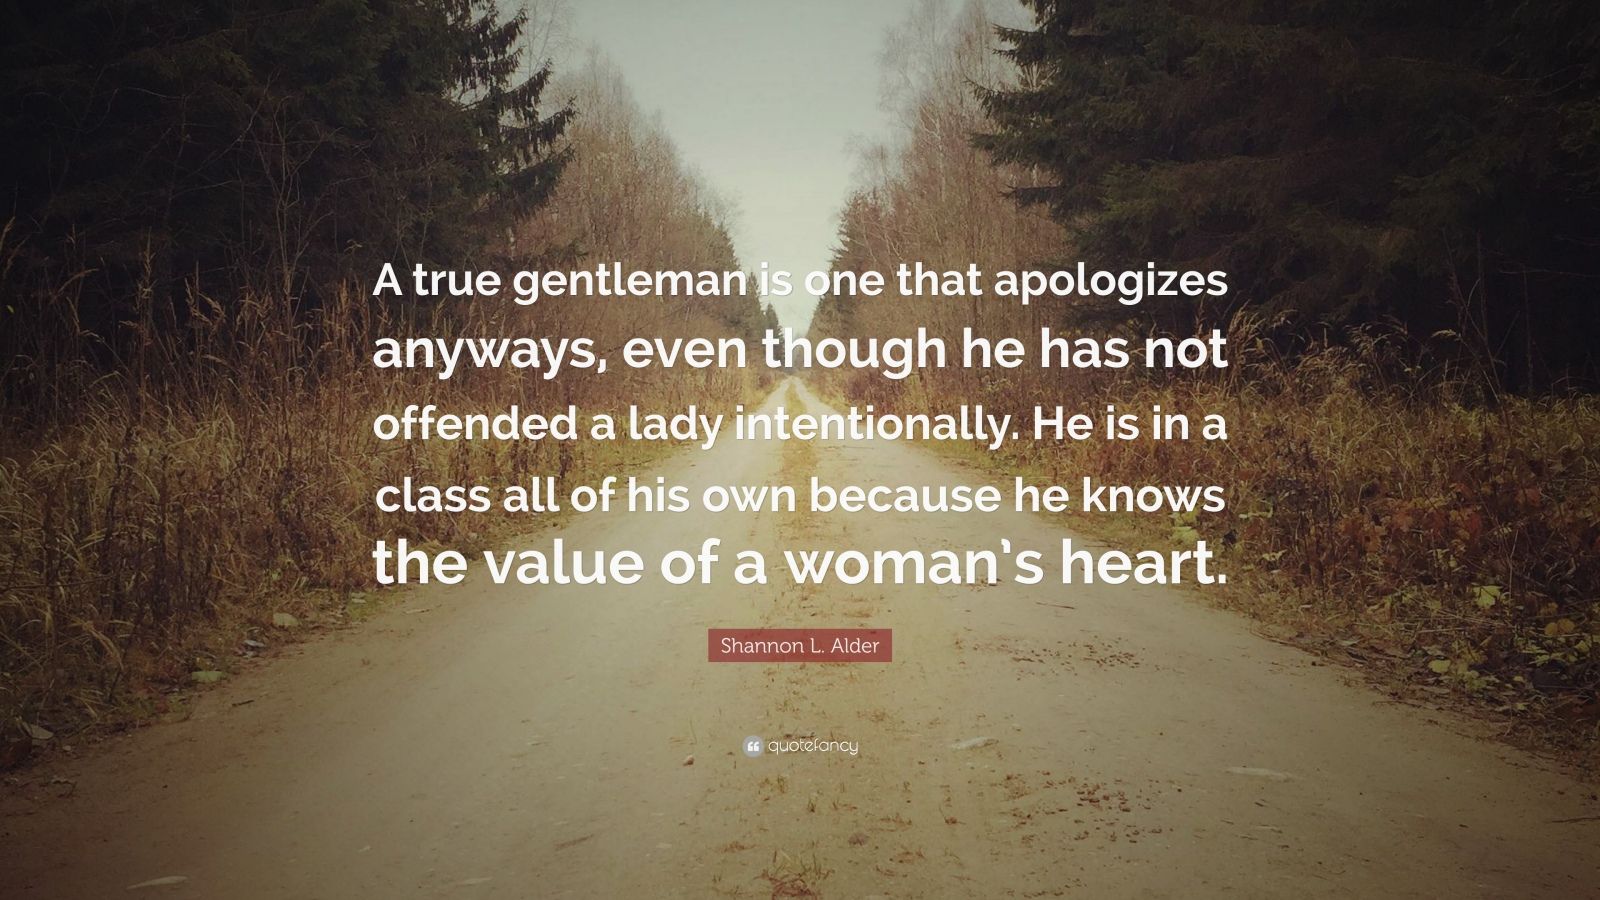 Shannon L. Alder Quote: “A true gentleman is one that apologizes